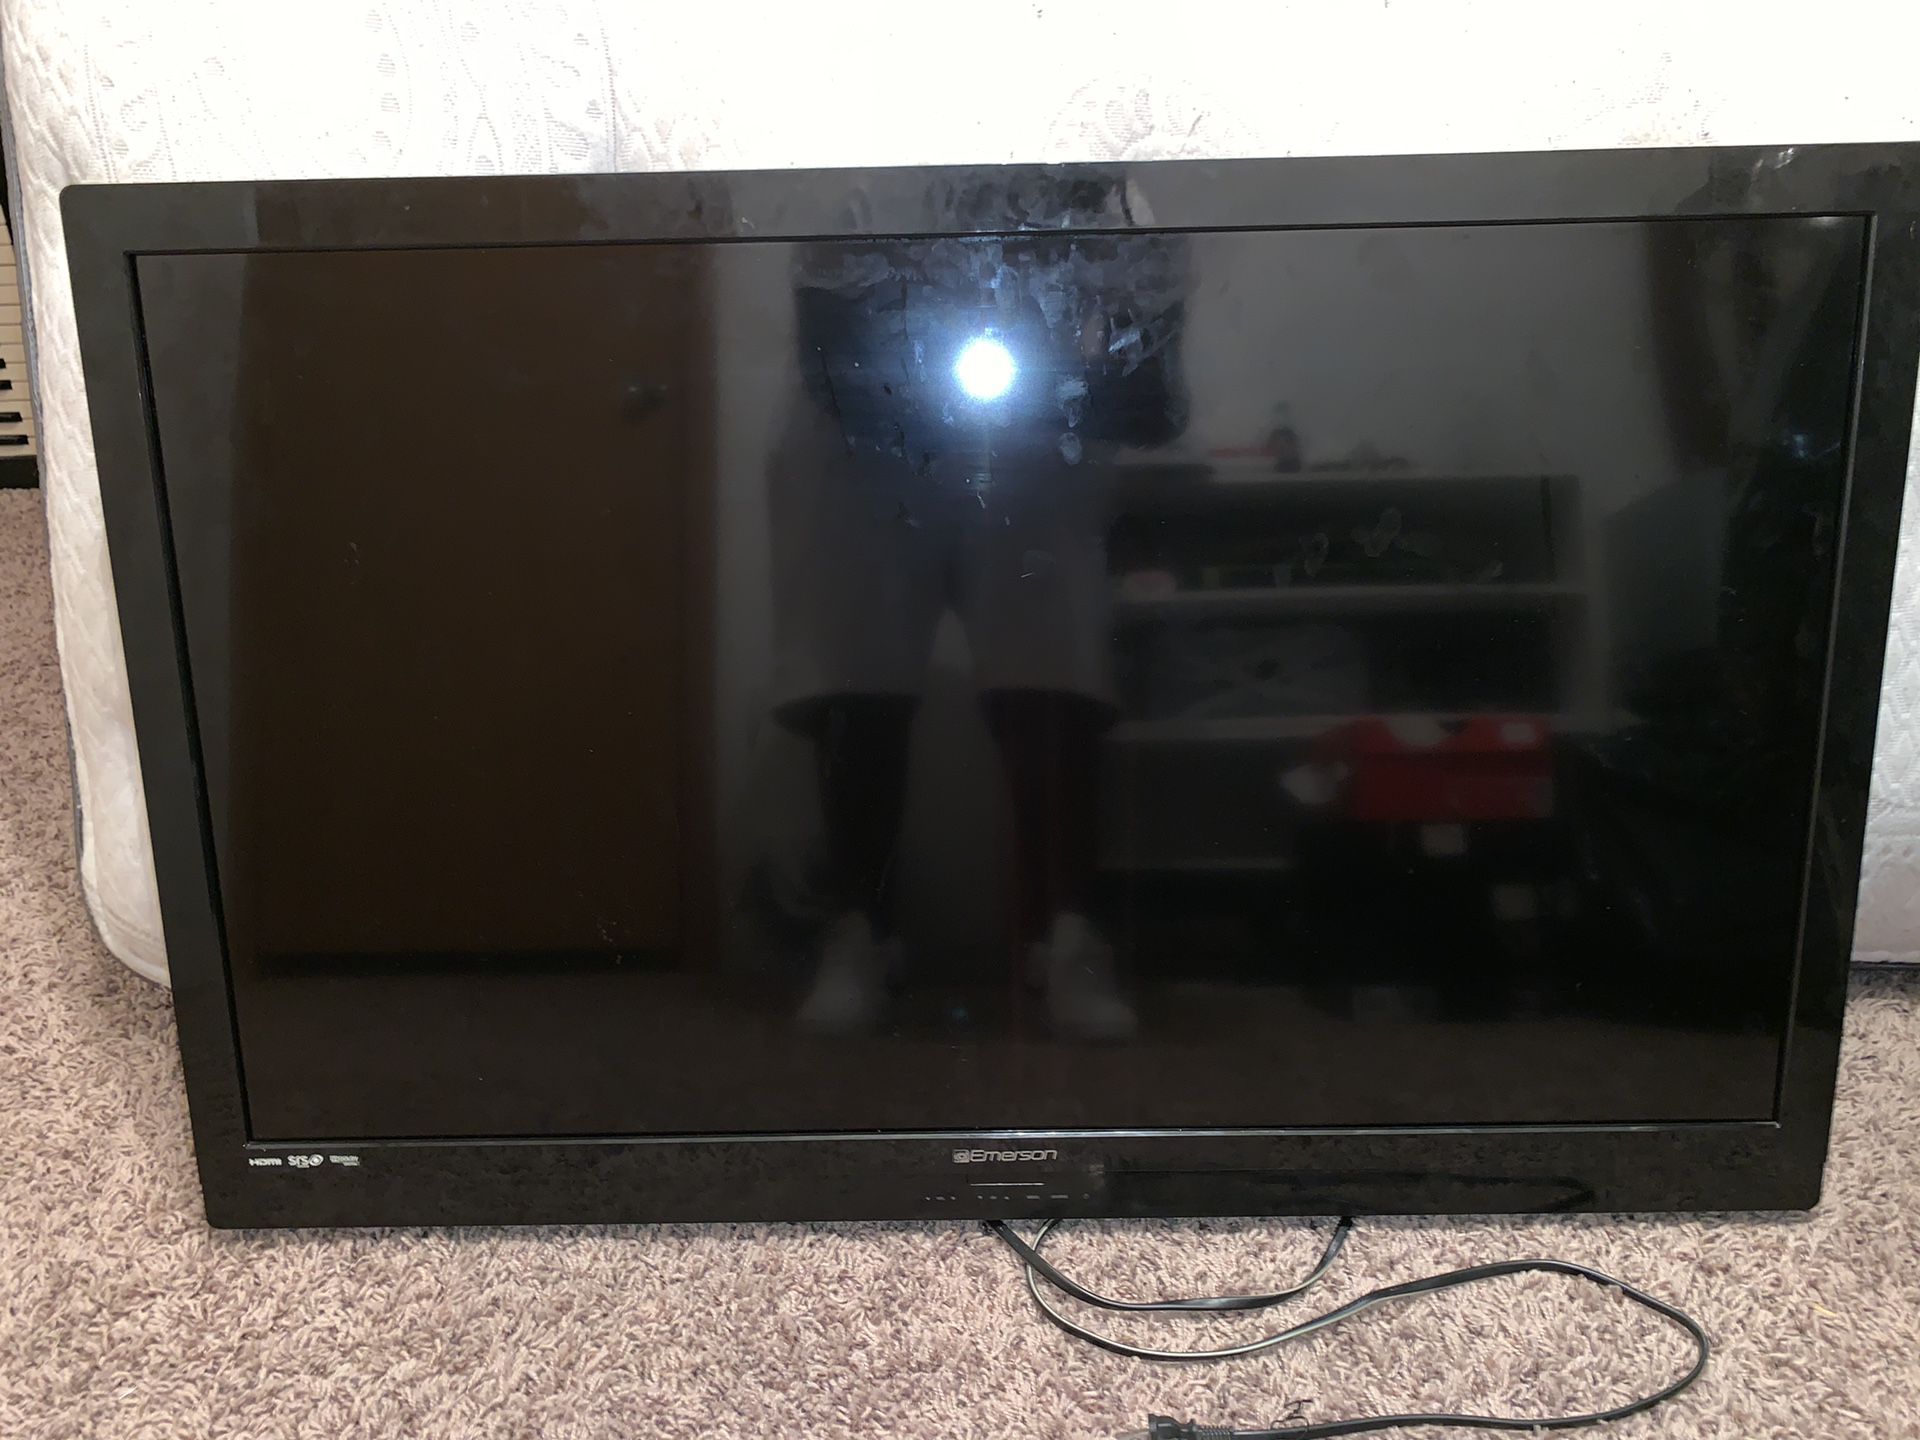 Emerson flatscreen tv (doesn’t come with mount ) think it’s a 40 in but not 100% sure